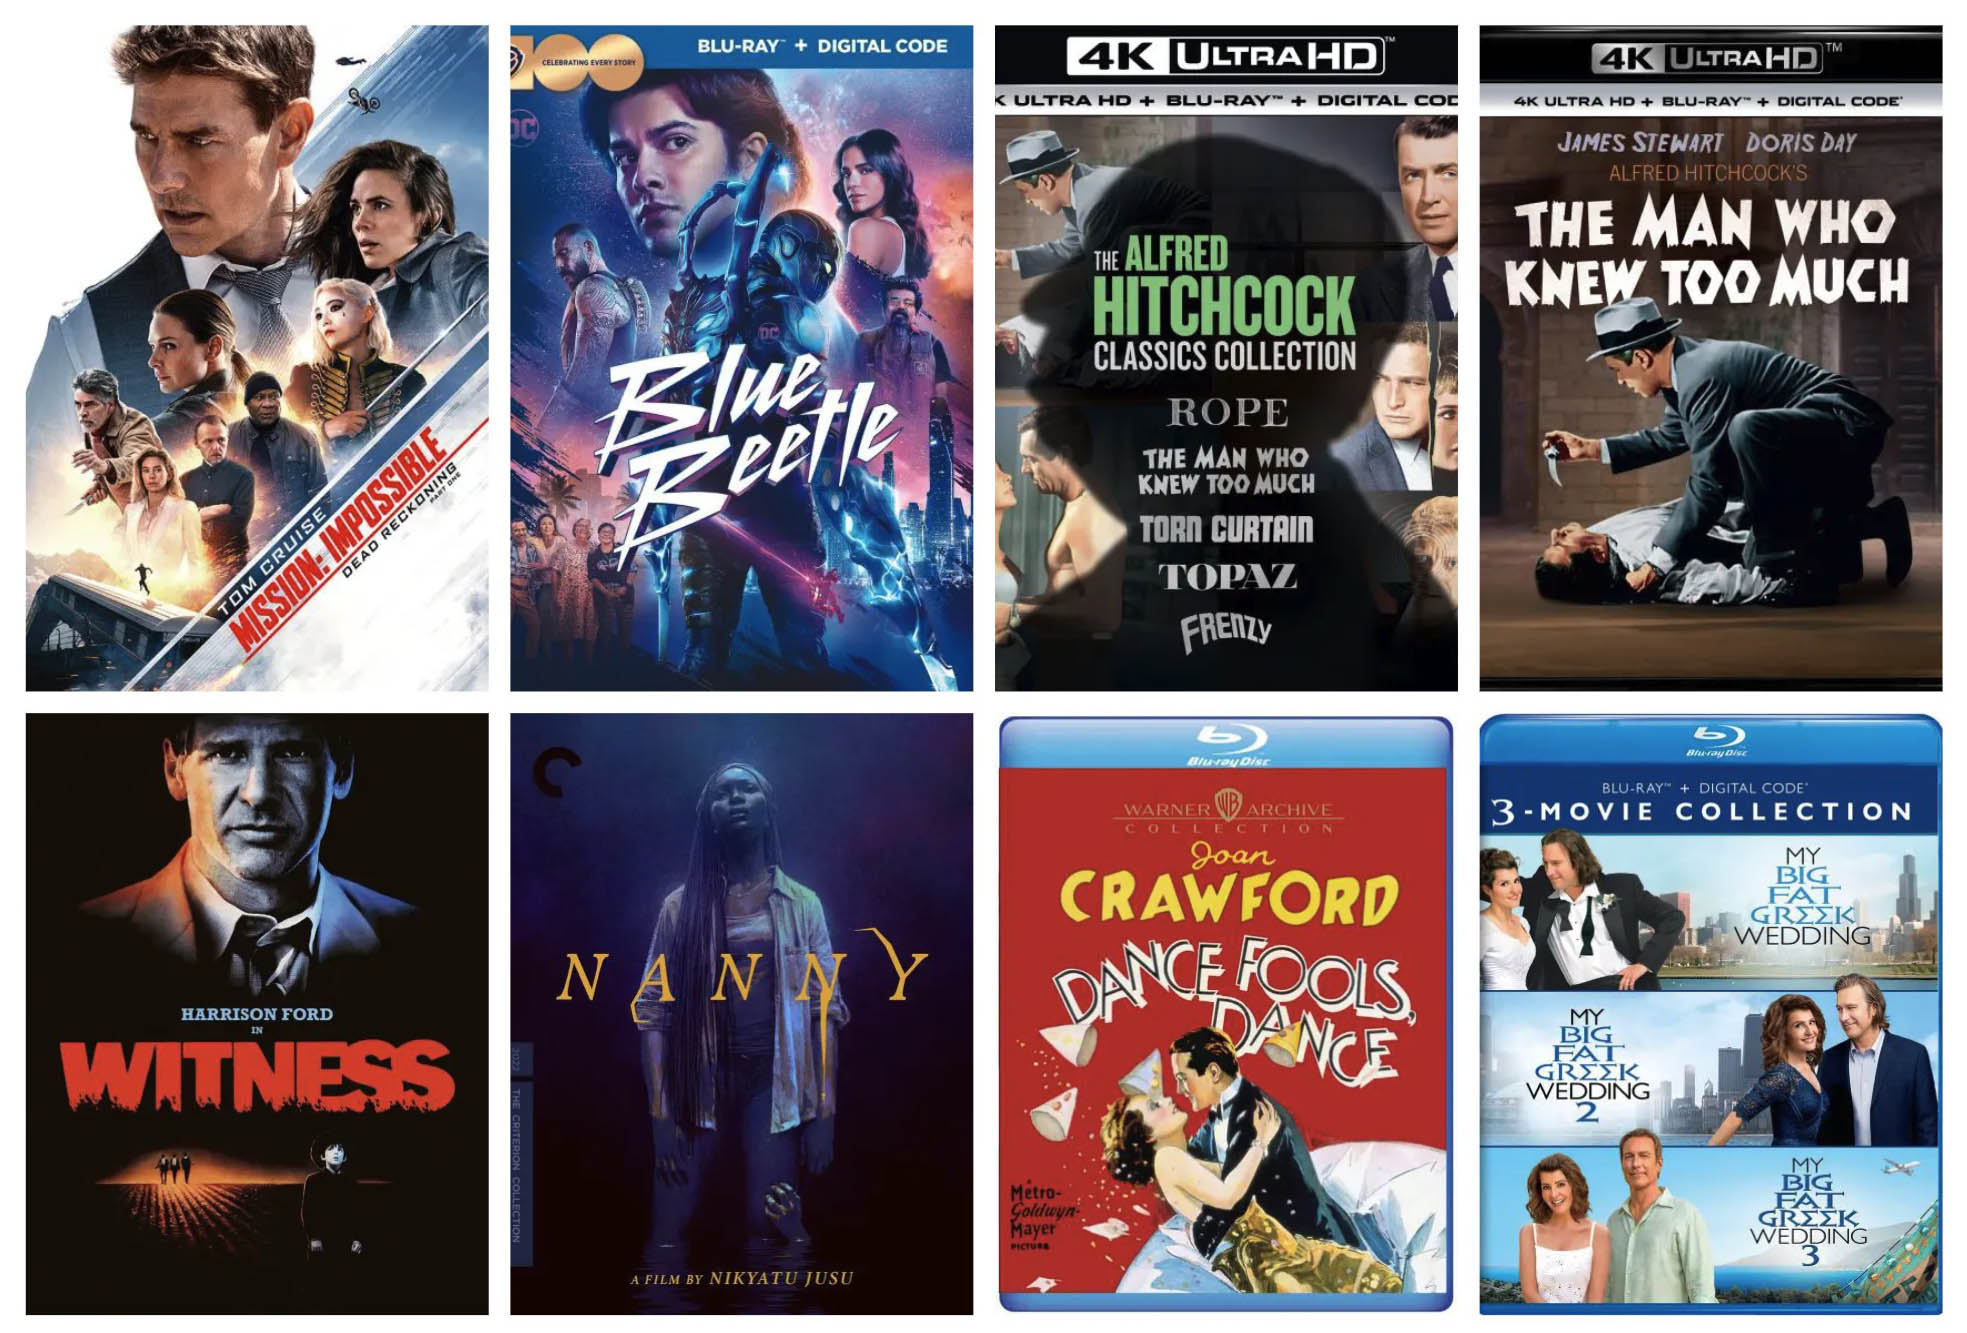 Mission: Impossible 7, Hitchcock 4k Vol. 3, Blu-ray Beetle, & More Blu-ray Releases Oct. 31